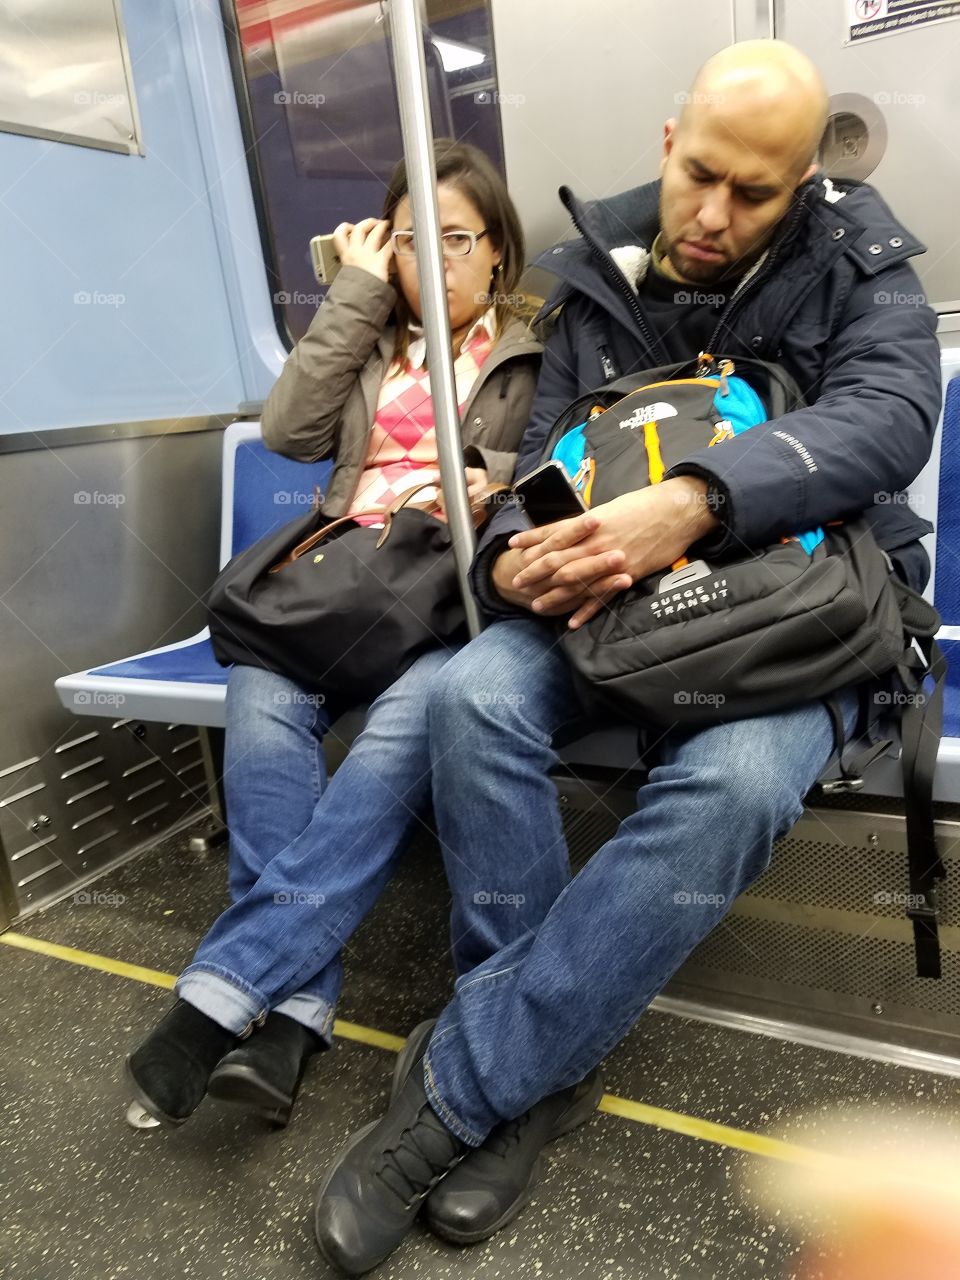 man and woman on train talking - but not to each other! phone sideways